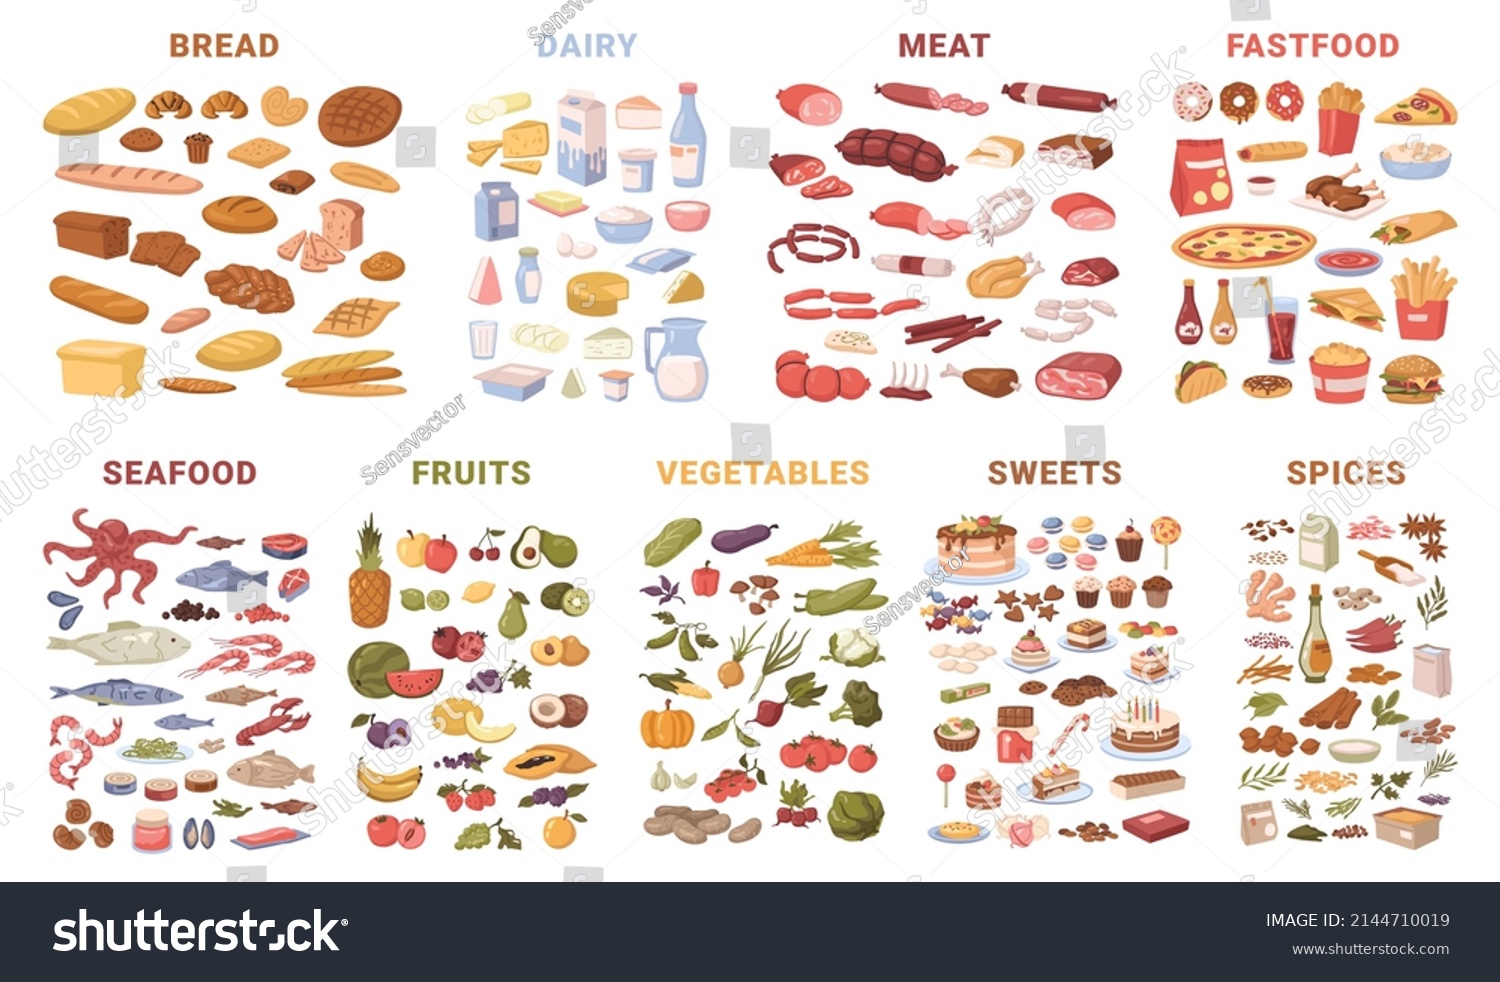 Set of food, isolated butchery and grocery products. Vector in flat style, bread pastry and dairy, meat and fast-food, seafood and fruits, vegetables and sweets spices, fastfood and takeaway snacks #2144710019